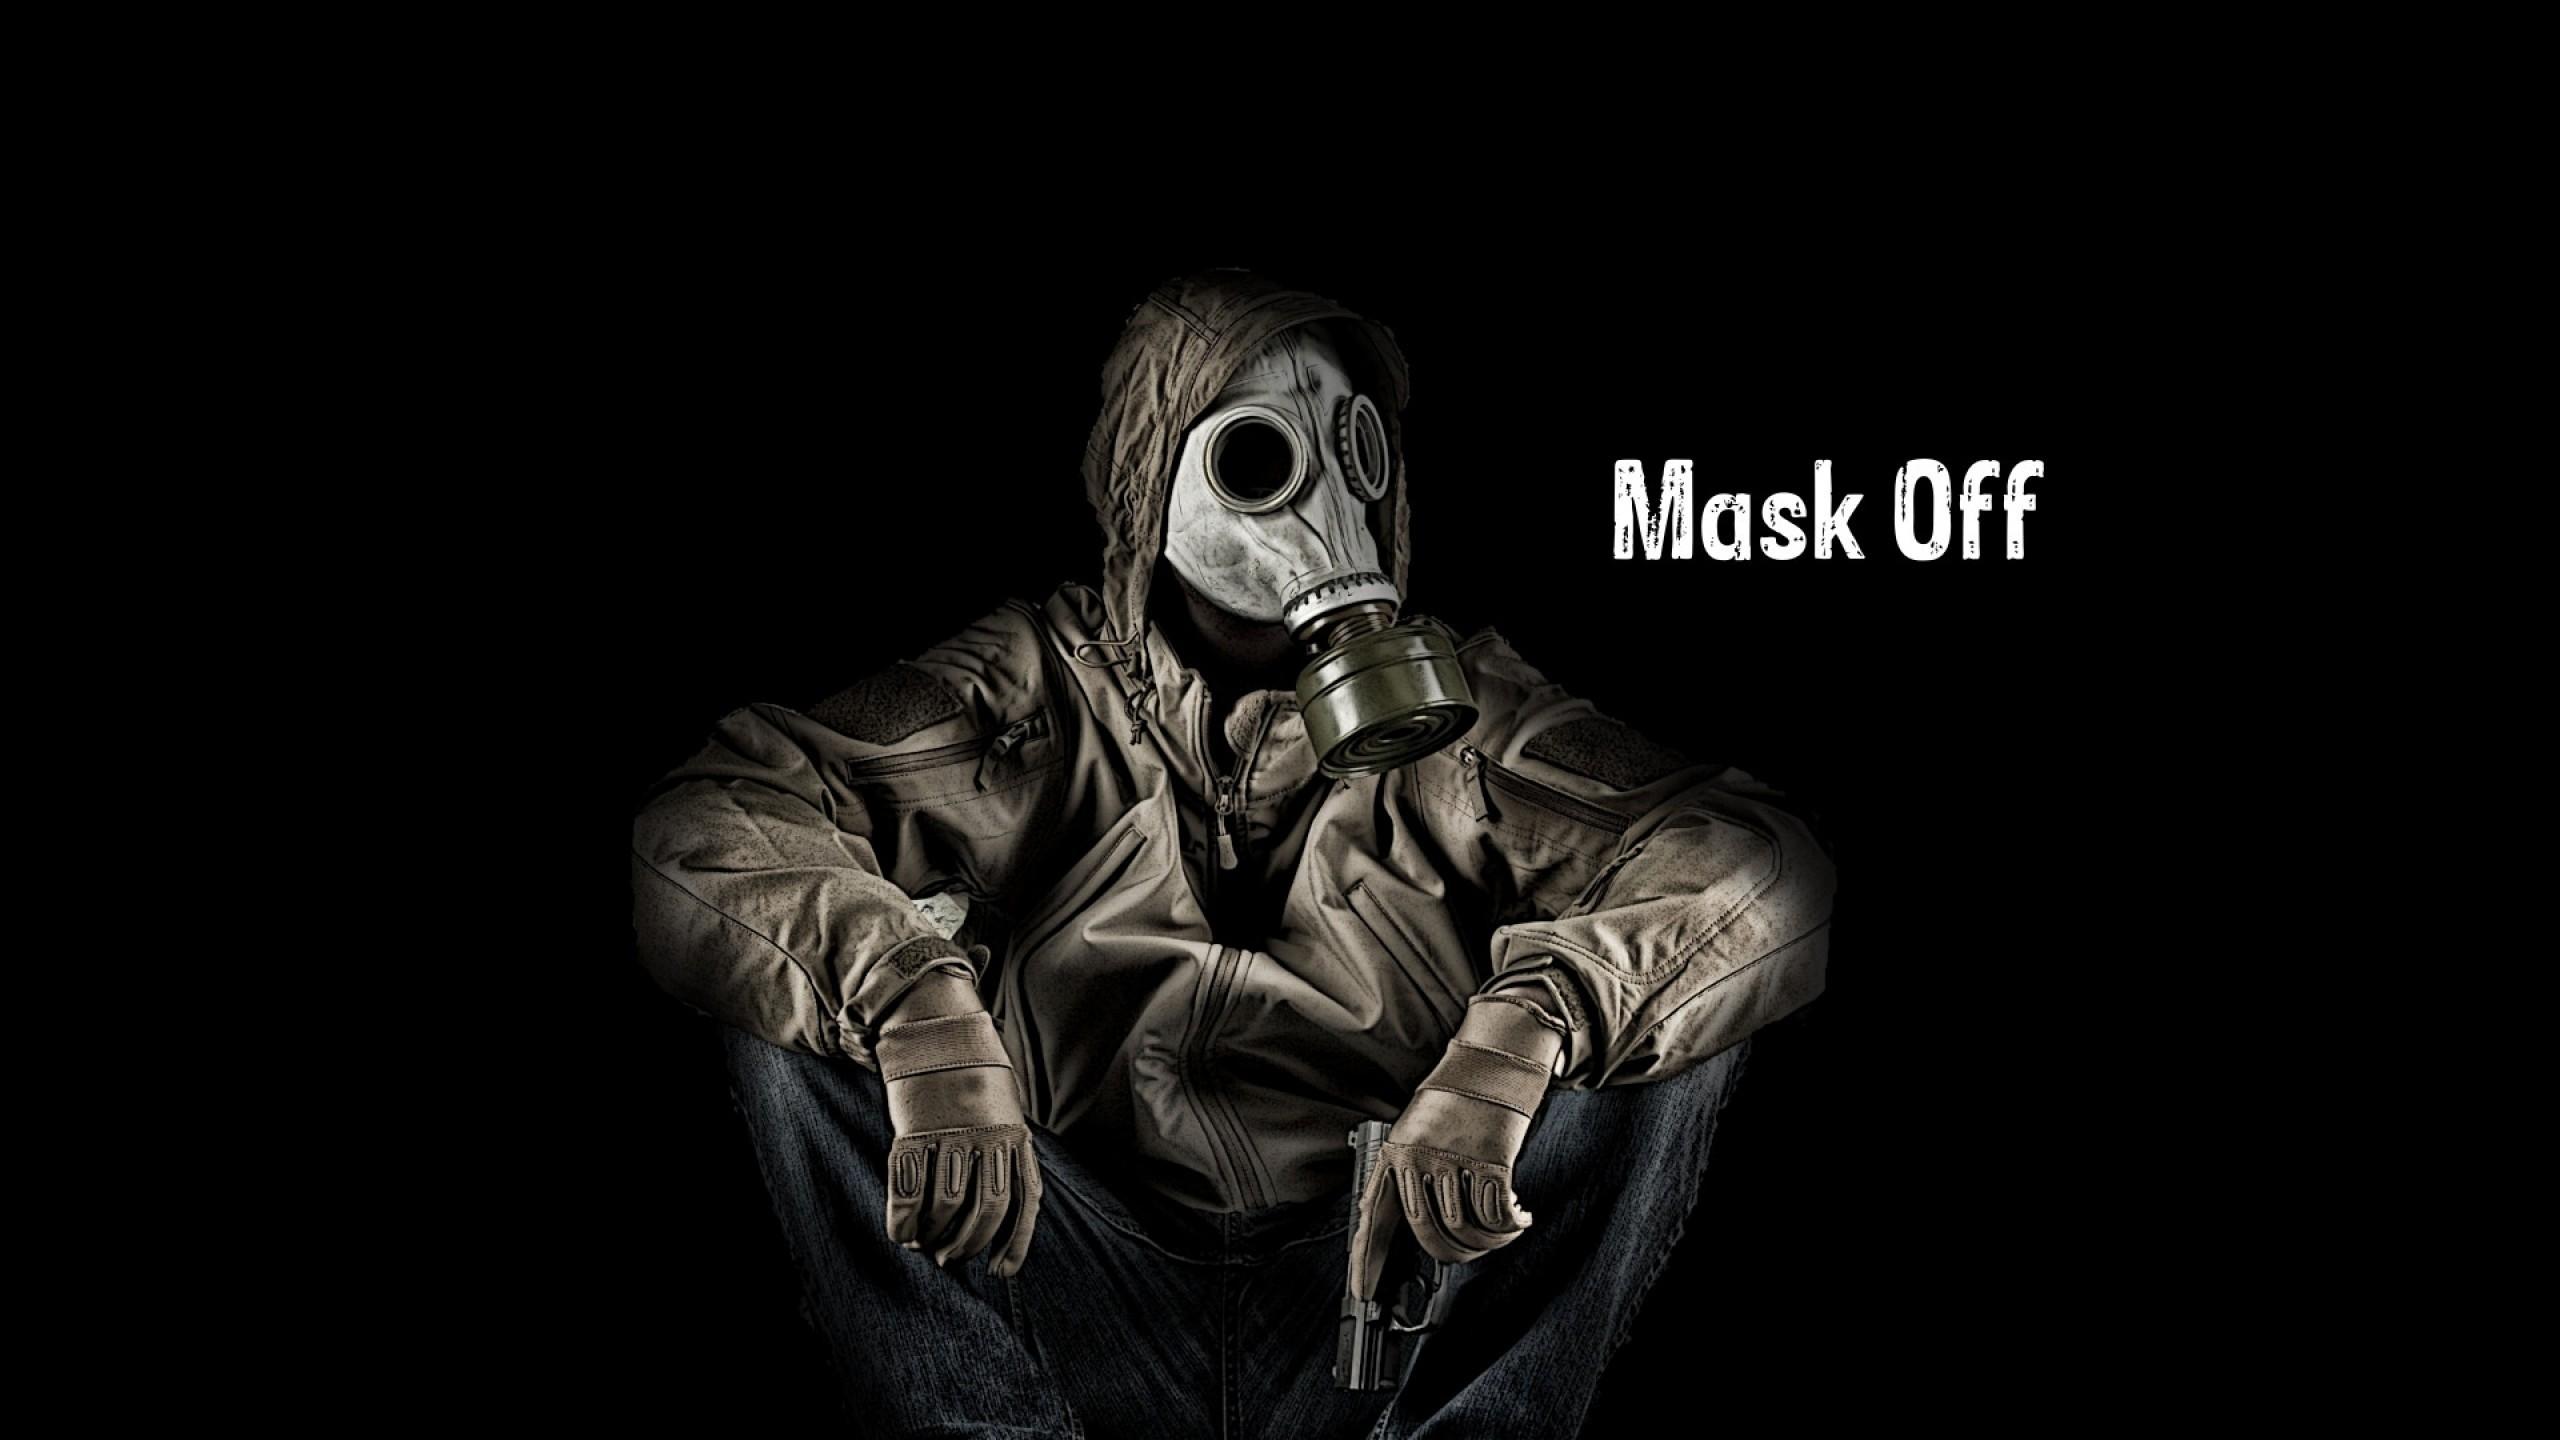 Download 2560x1440 Mask, Man, Mystery Wallpaper for iMac 27 inch